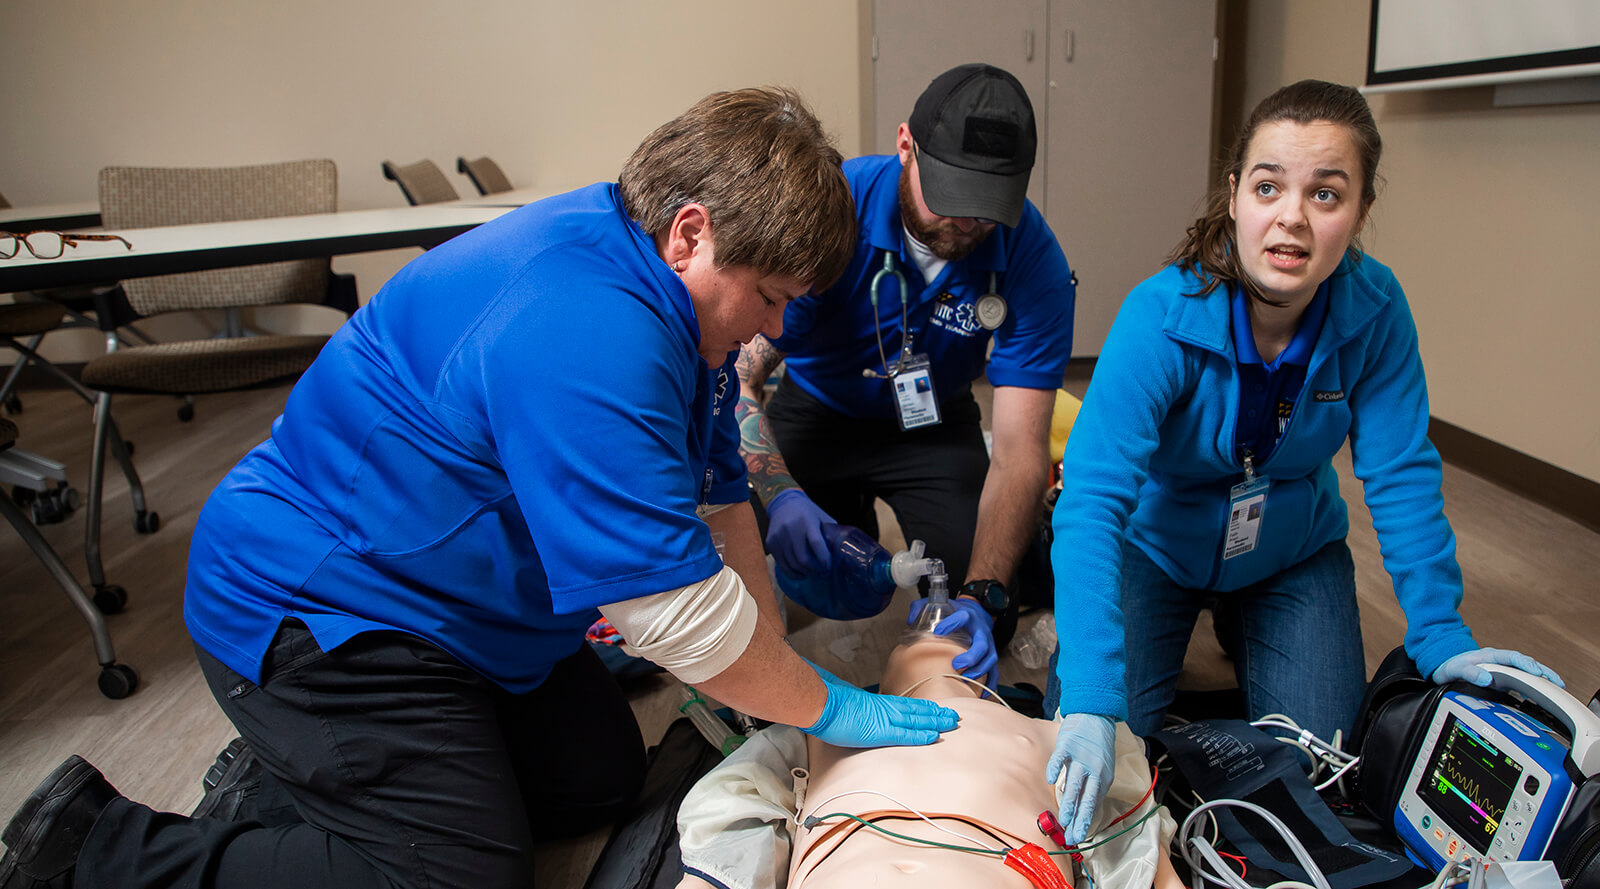 A group of EMT students practicing skills on a simulated patient